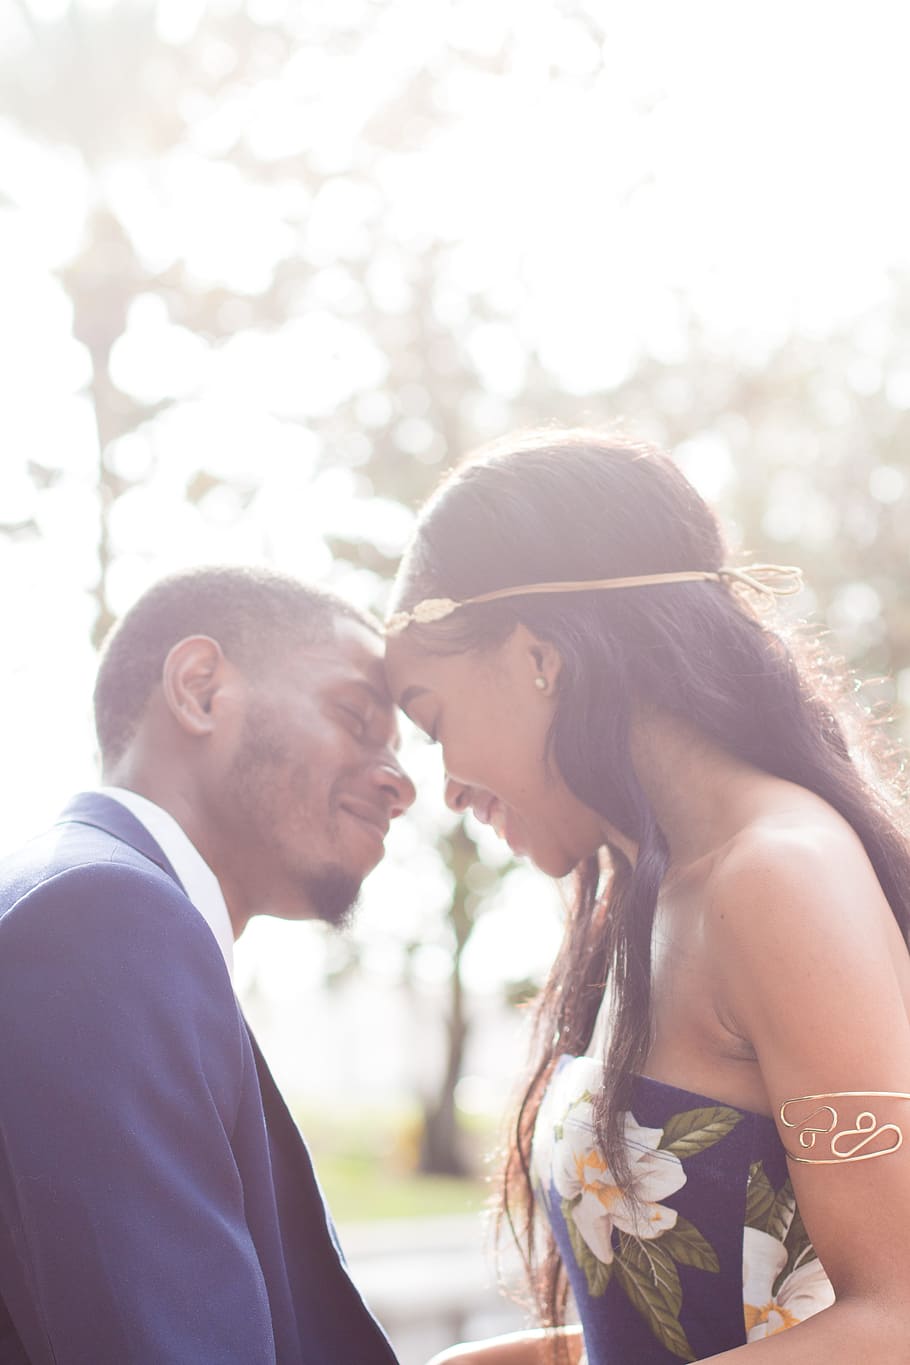 man, woman, smiling, \, people, wedding, marriage, love, intimate, happy